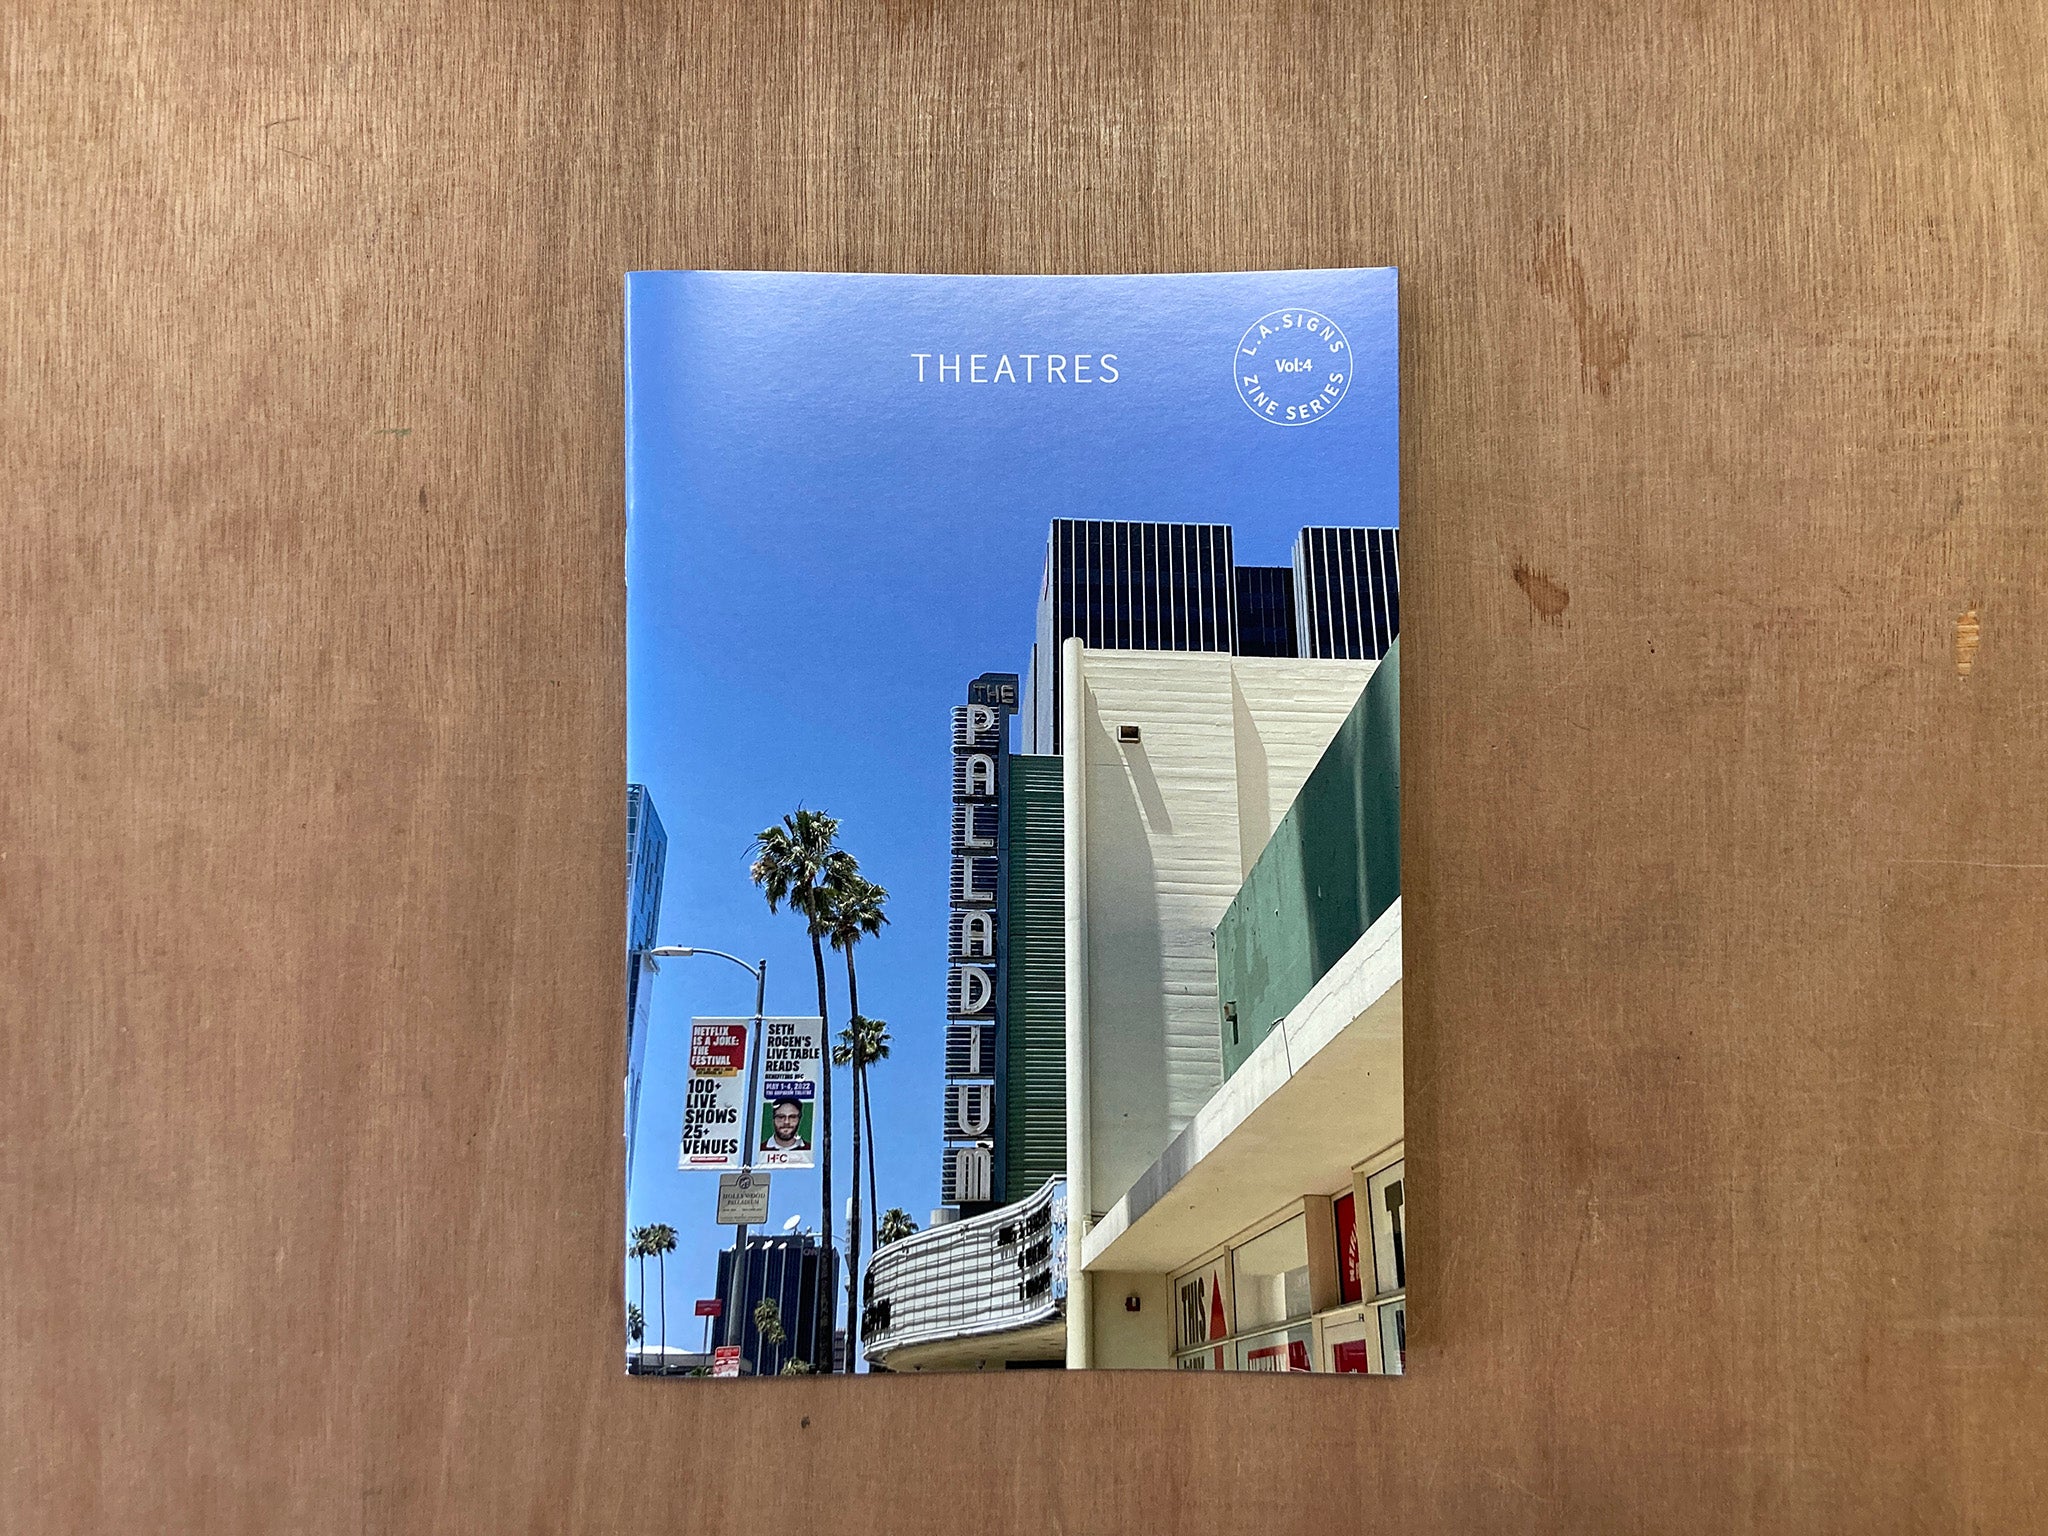 L.A. SIGNS ZINE SERIES: THEATRES by Paul Price